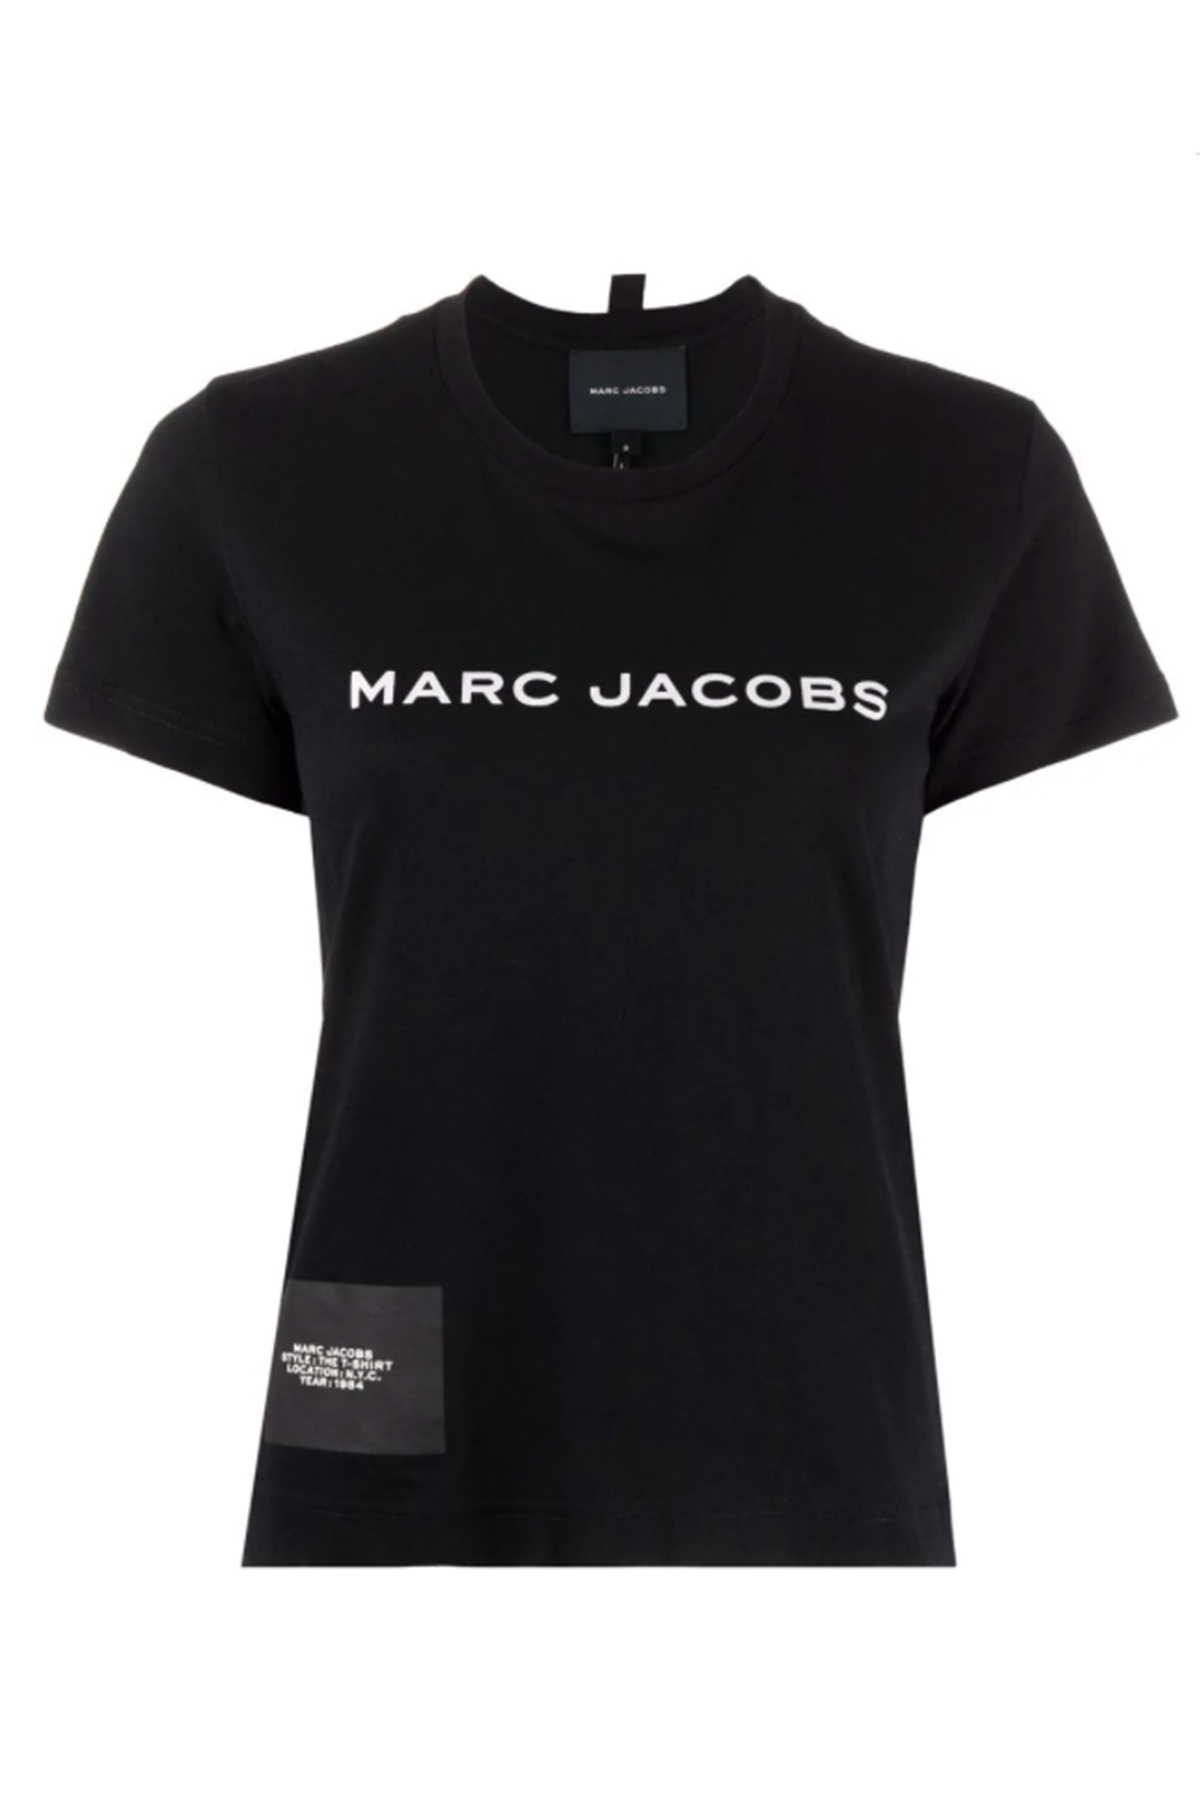 MARC JACOBS in Esbjerg | SHOPenauer